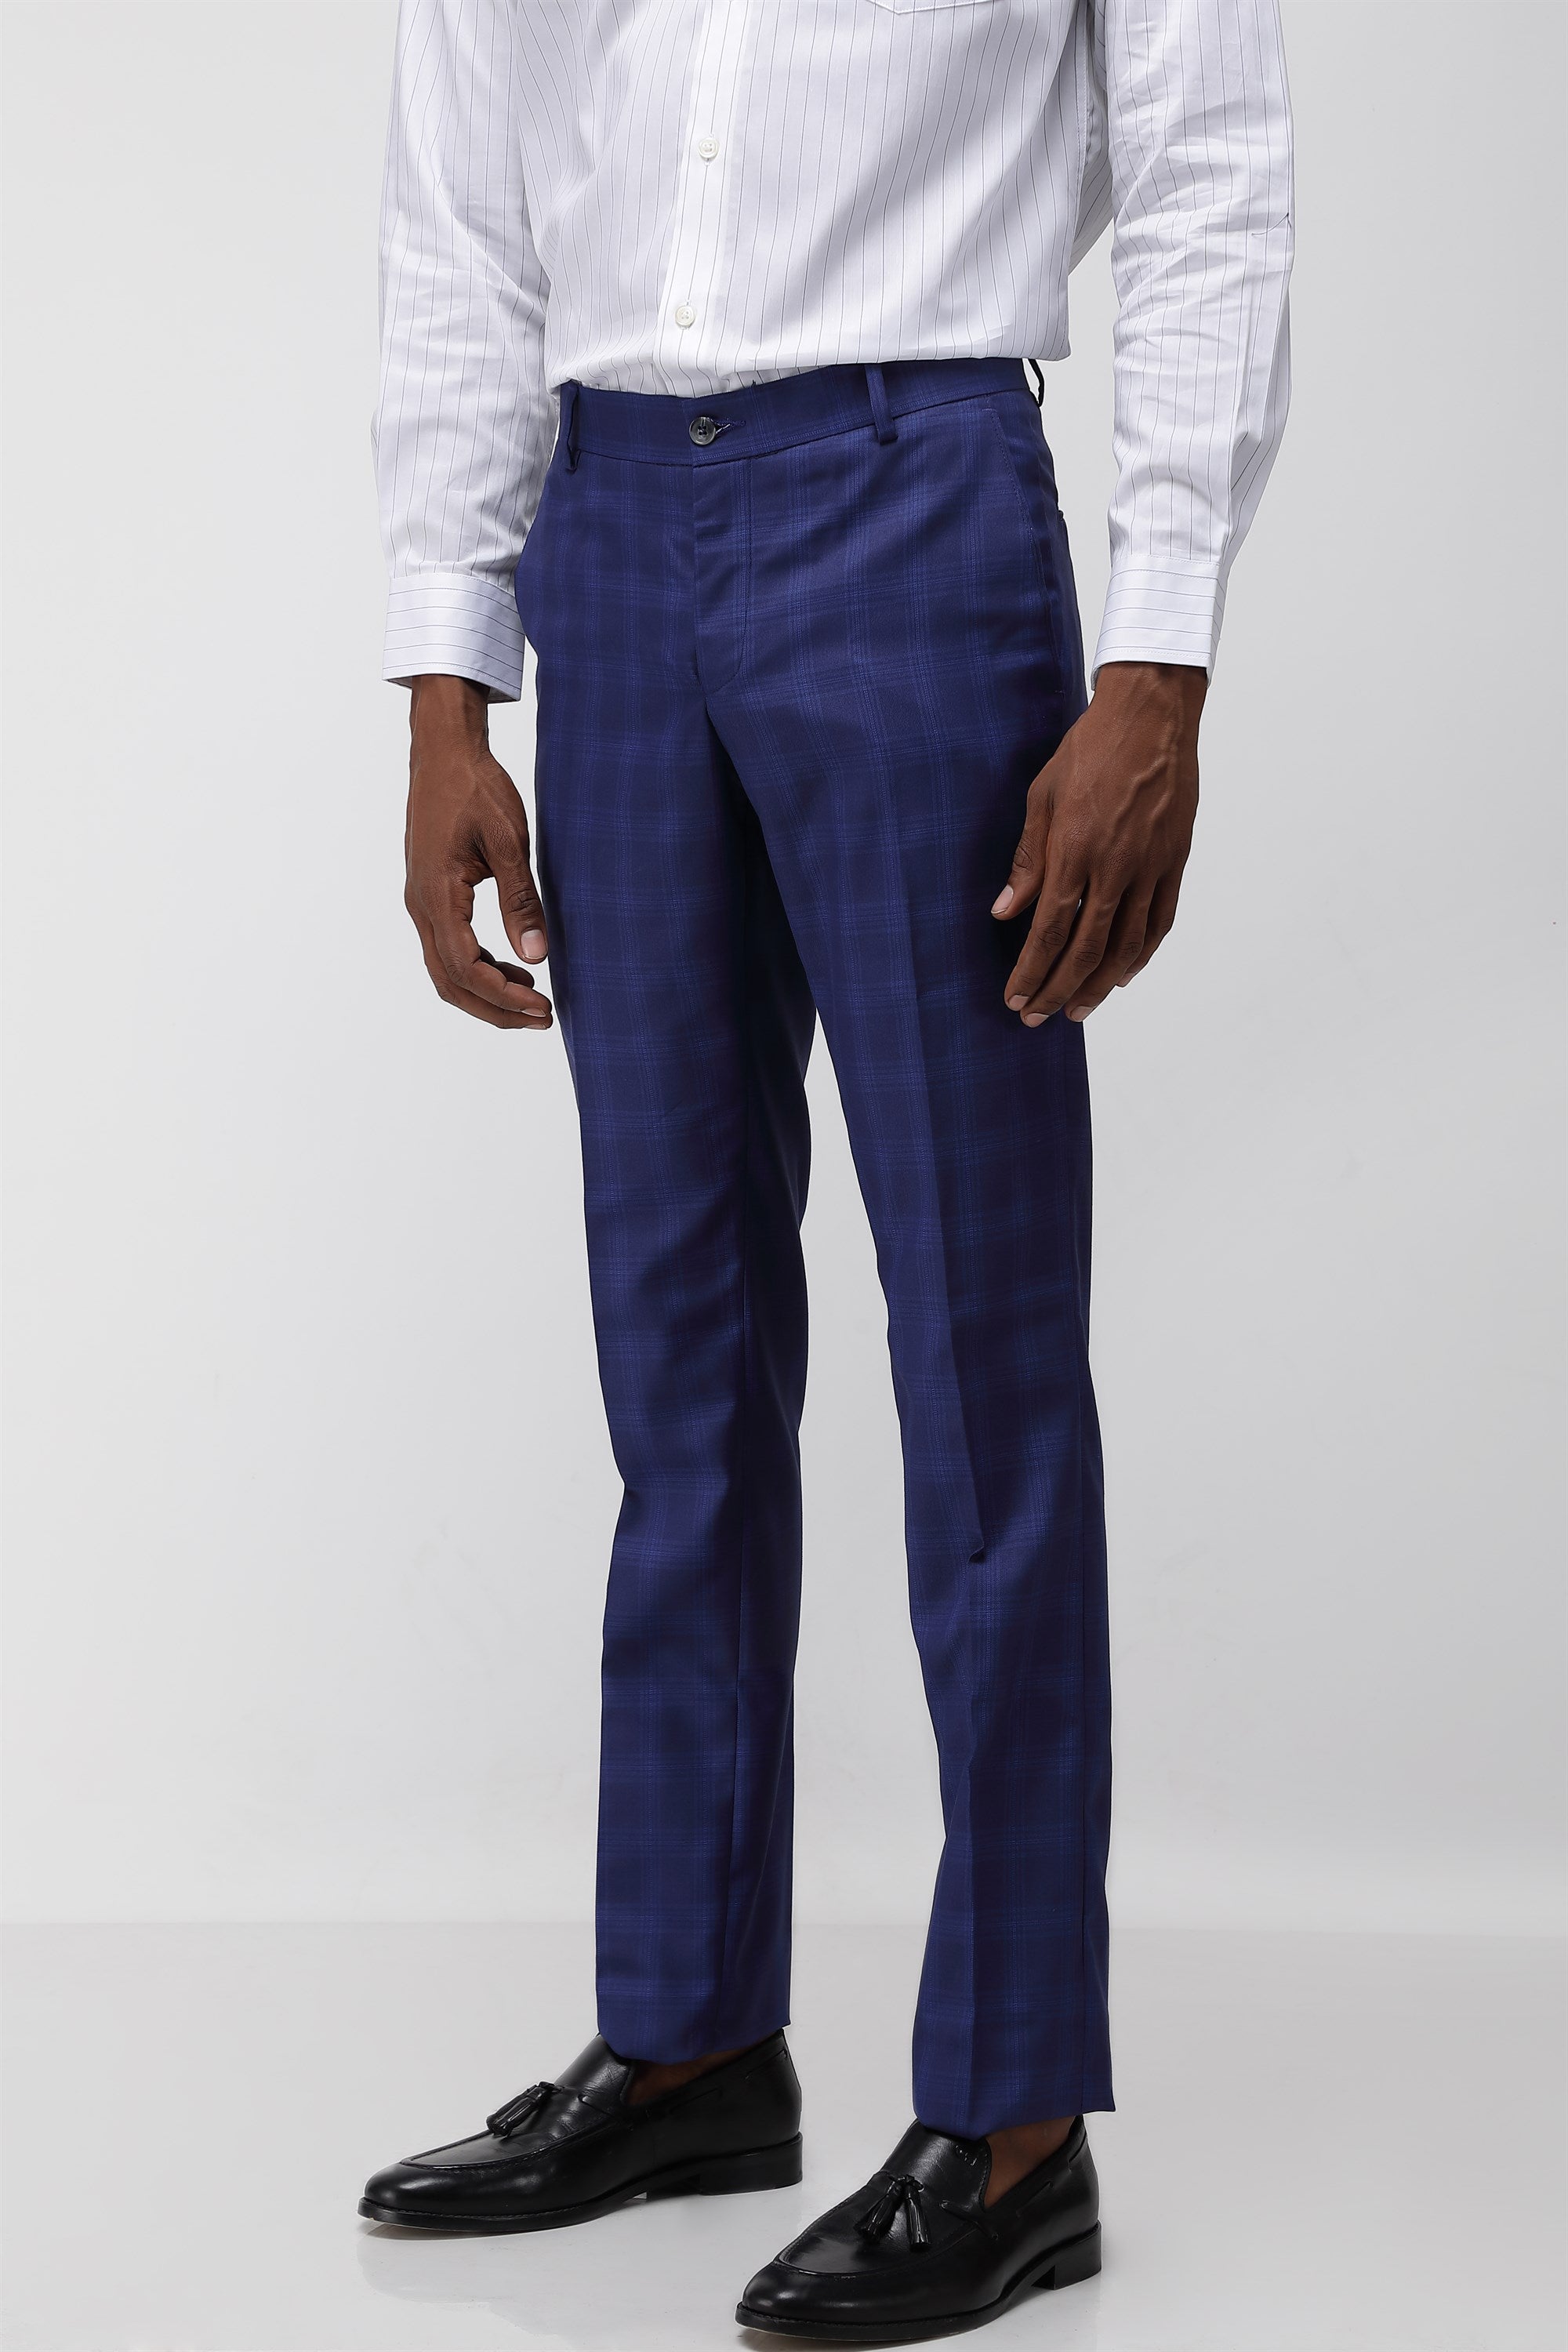 Favorite affordable brands for men's chinos? : r/mensfashion